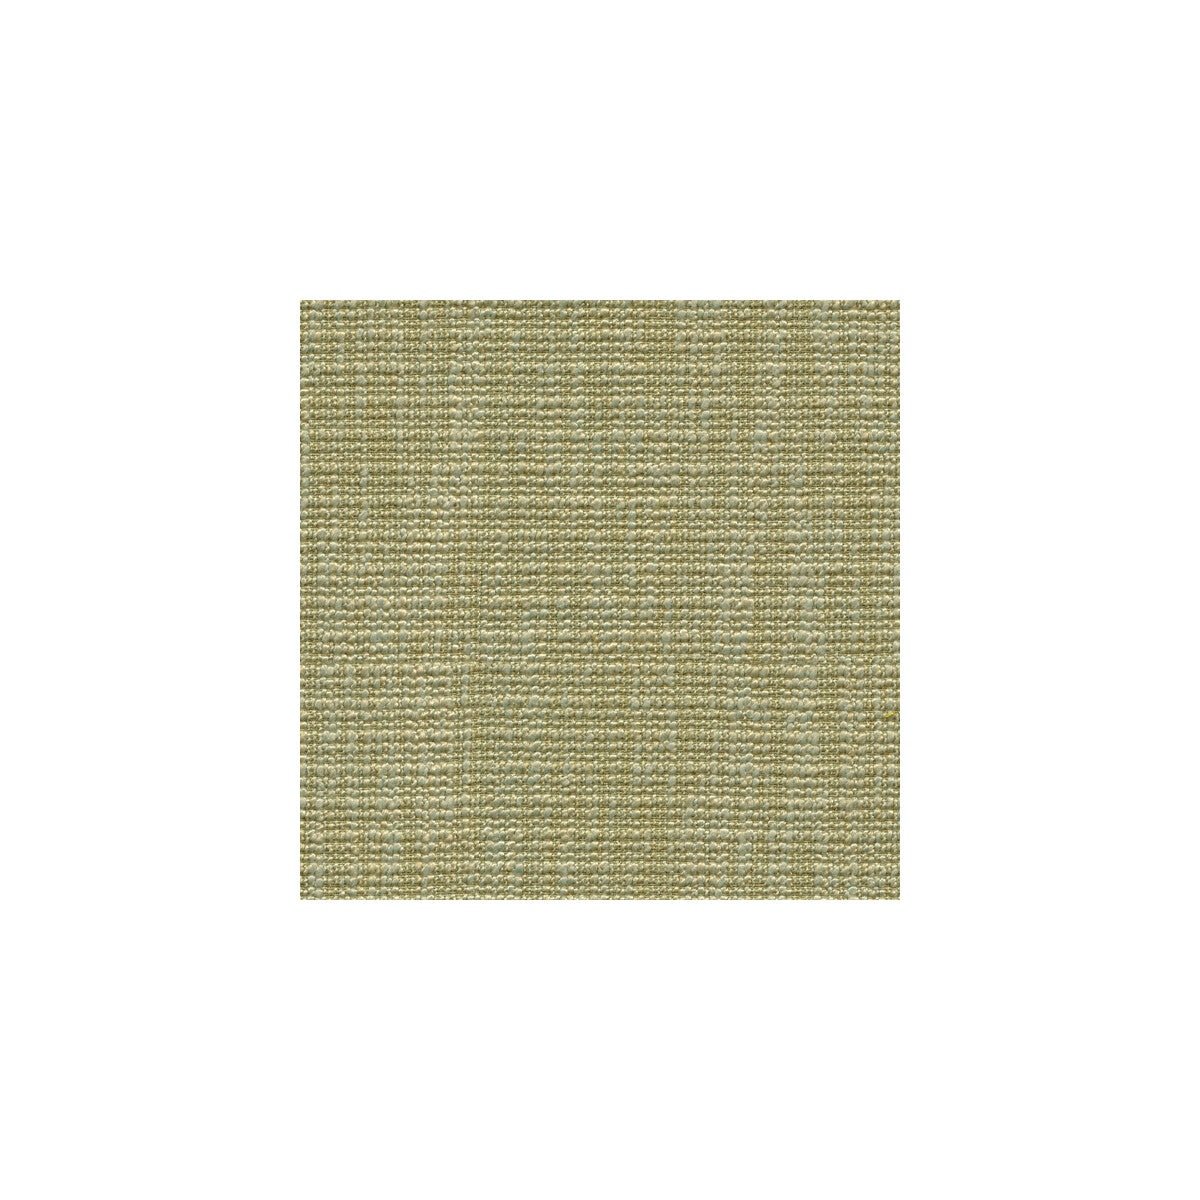 Kravet Basics fabric in 32290-3 color - pattern 32290.3.0 - by Kravet Basics in the Perfect Plains collection